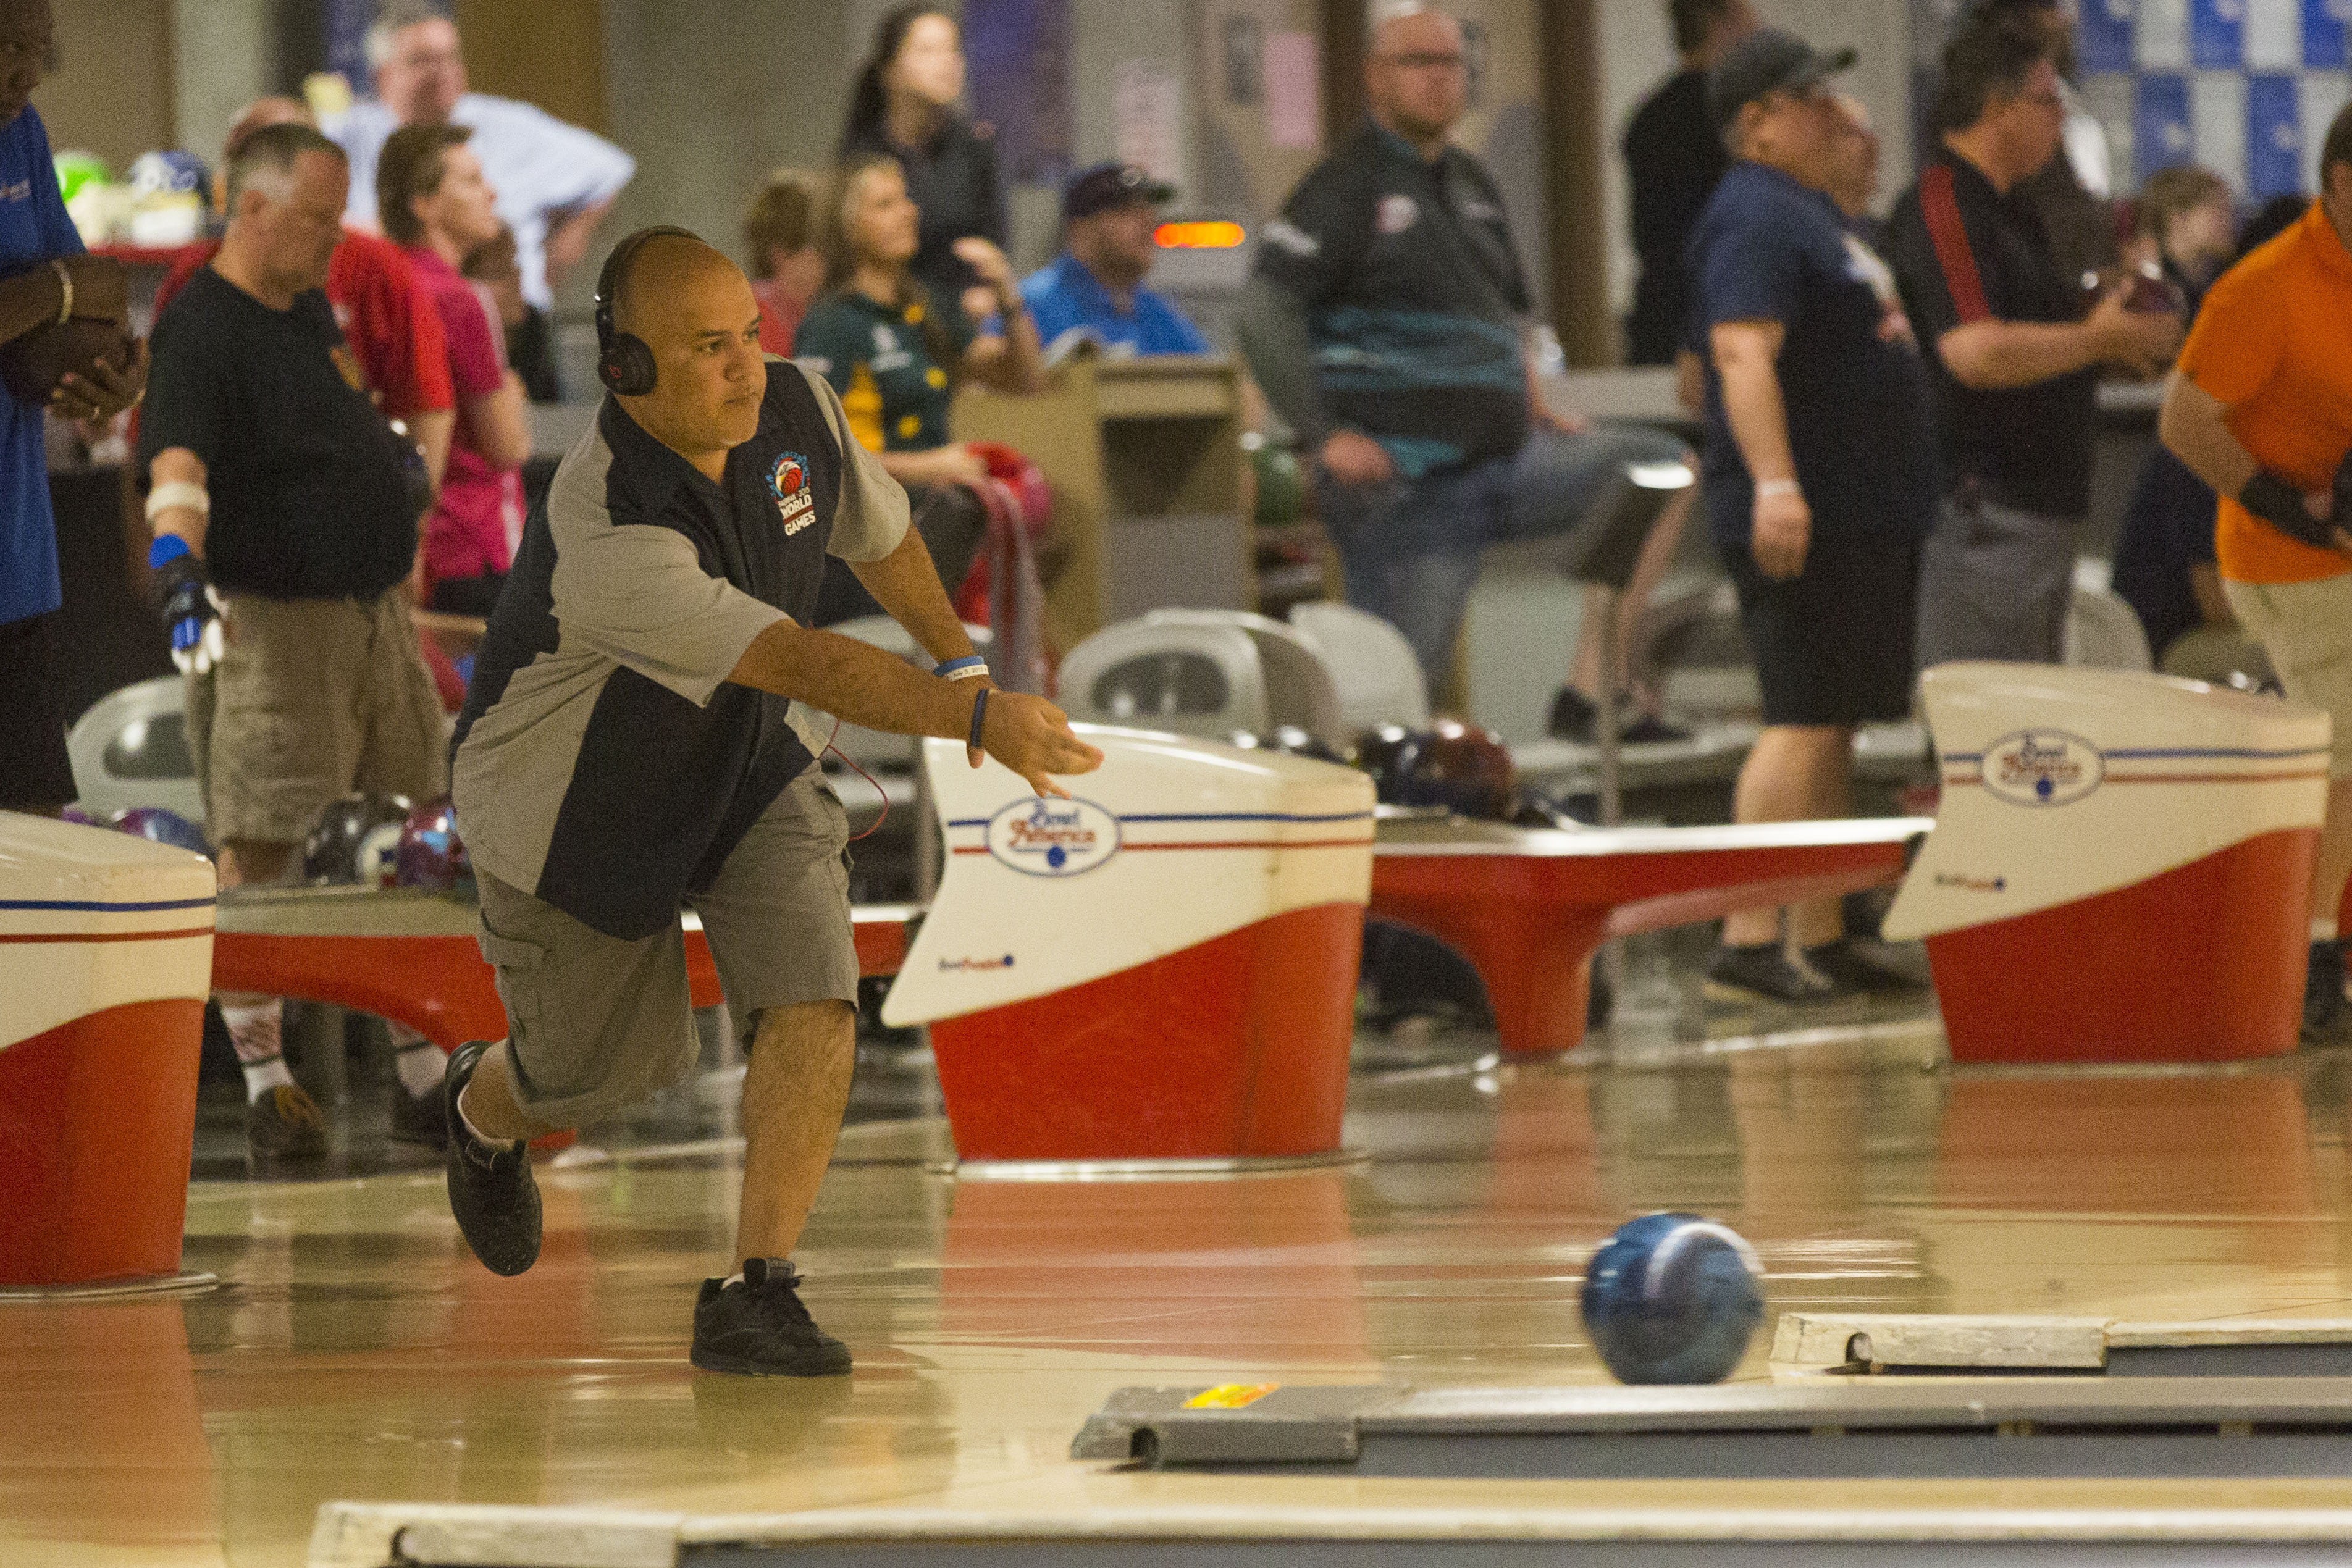 Hector Arredondo, CBP officer from the Sumas, Washington, goes for a strike at the 2015 World Police & Fire Games bowling tournament. Photo by James Tourtellotte